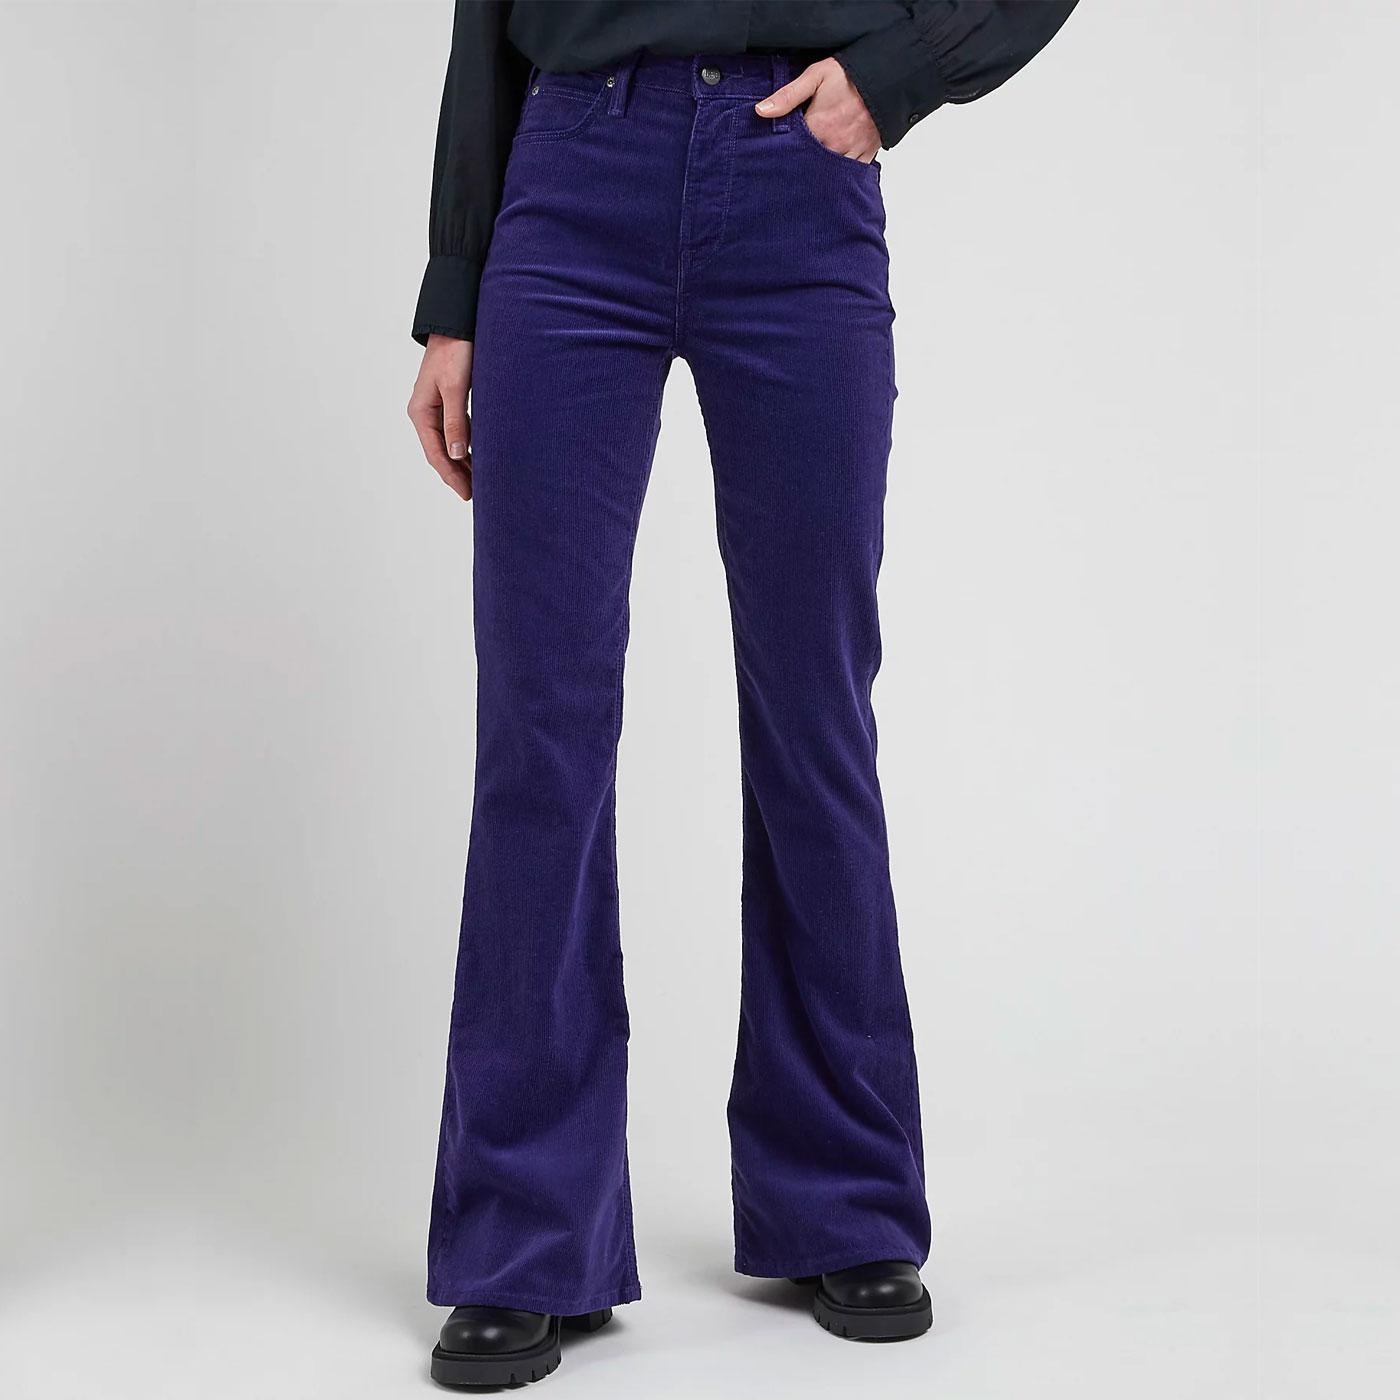 Breese Lee Retro 70s Flared Cord Jeans  Blueberry